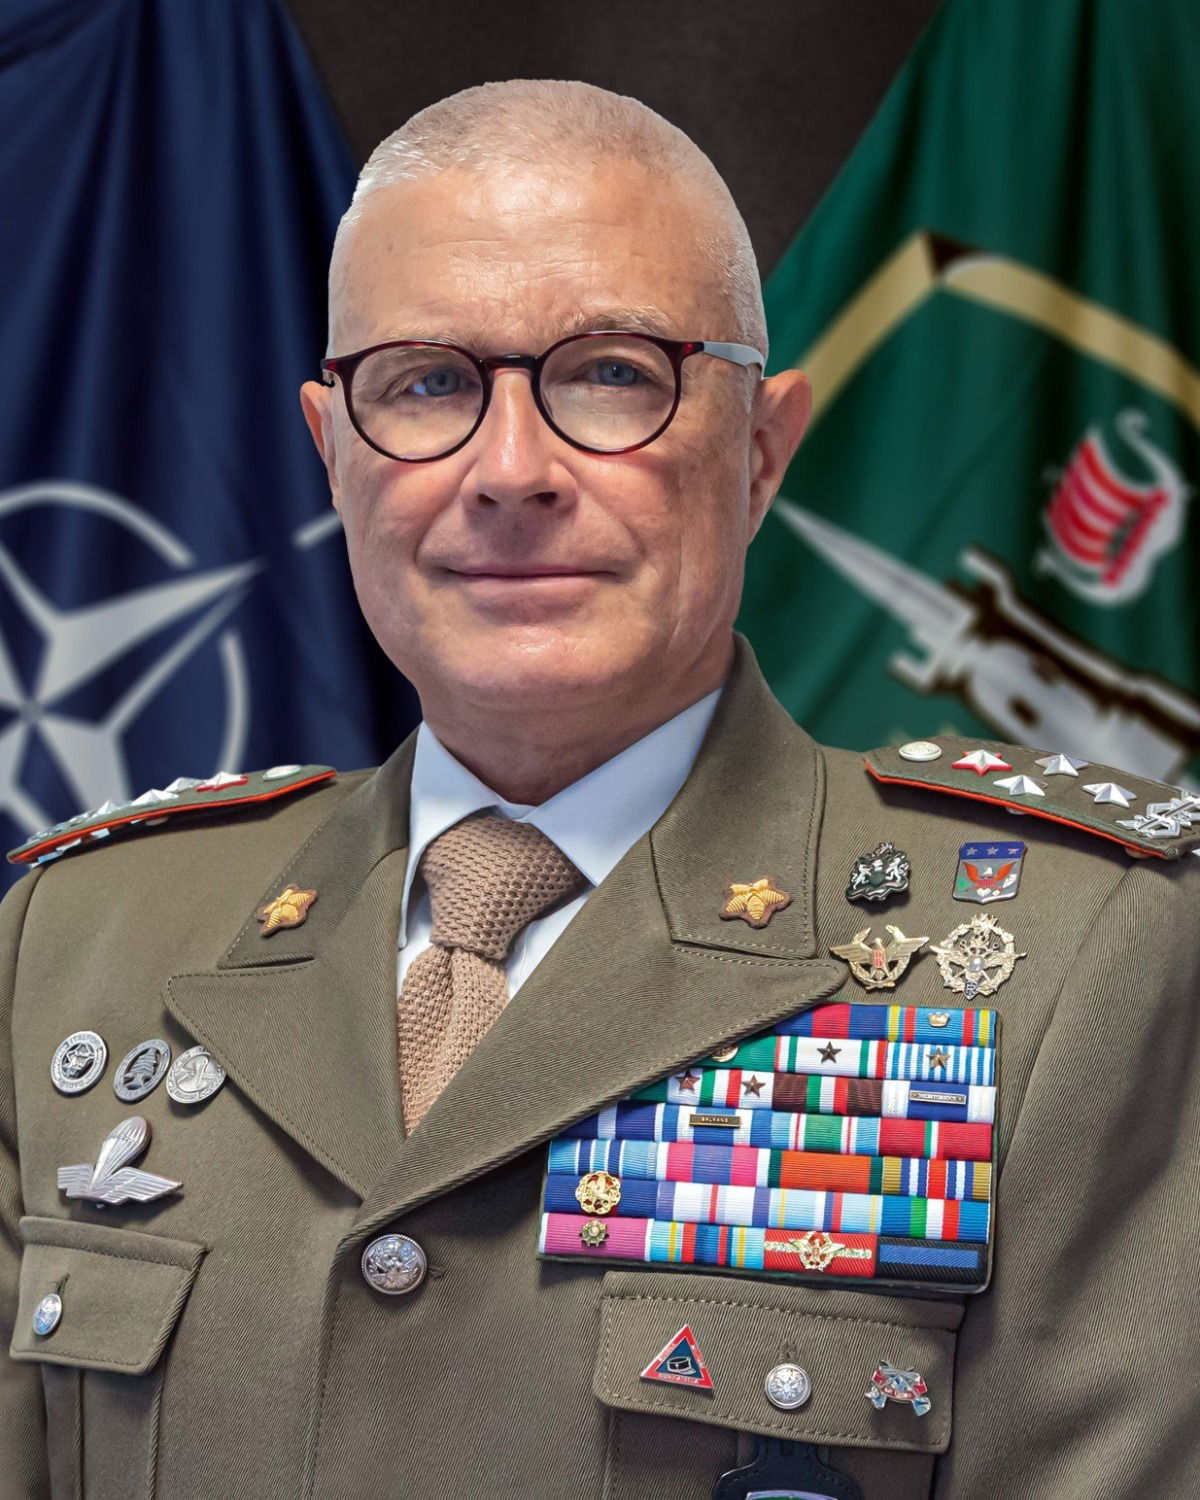 June 3rd 2022, Change of Command Ceremony JFCBS from General Vollmer to General Miglietta